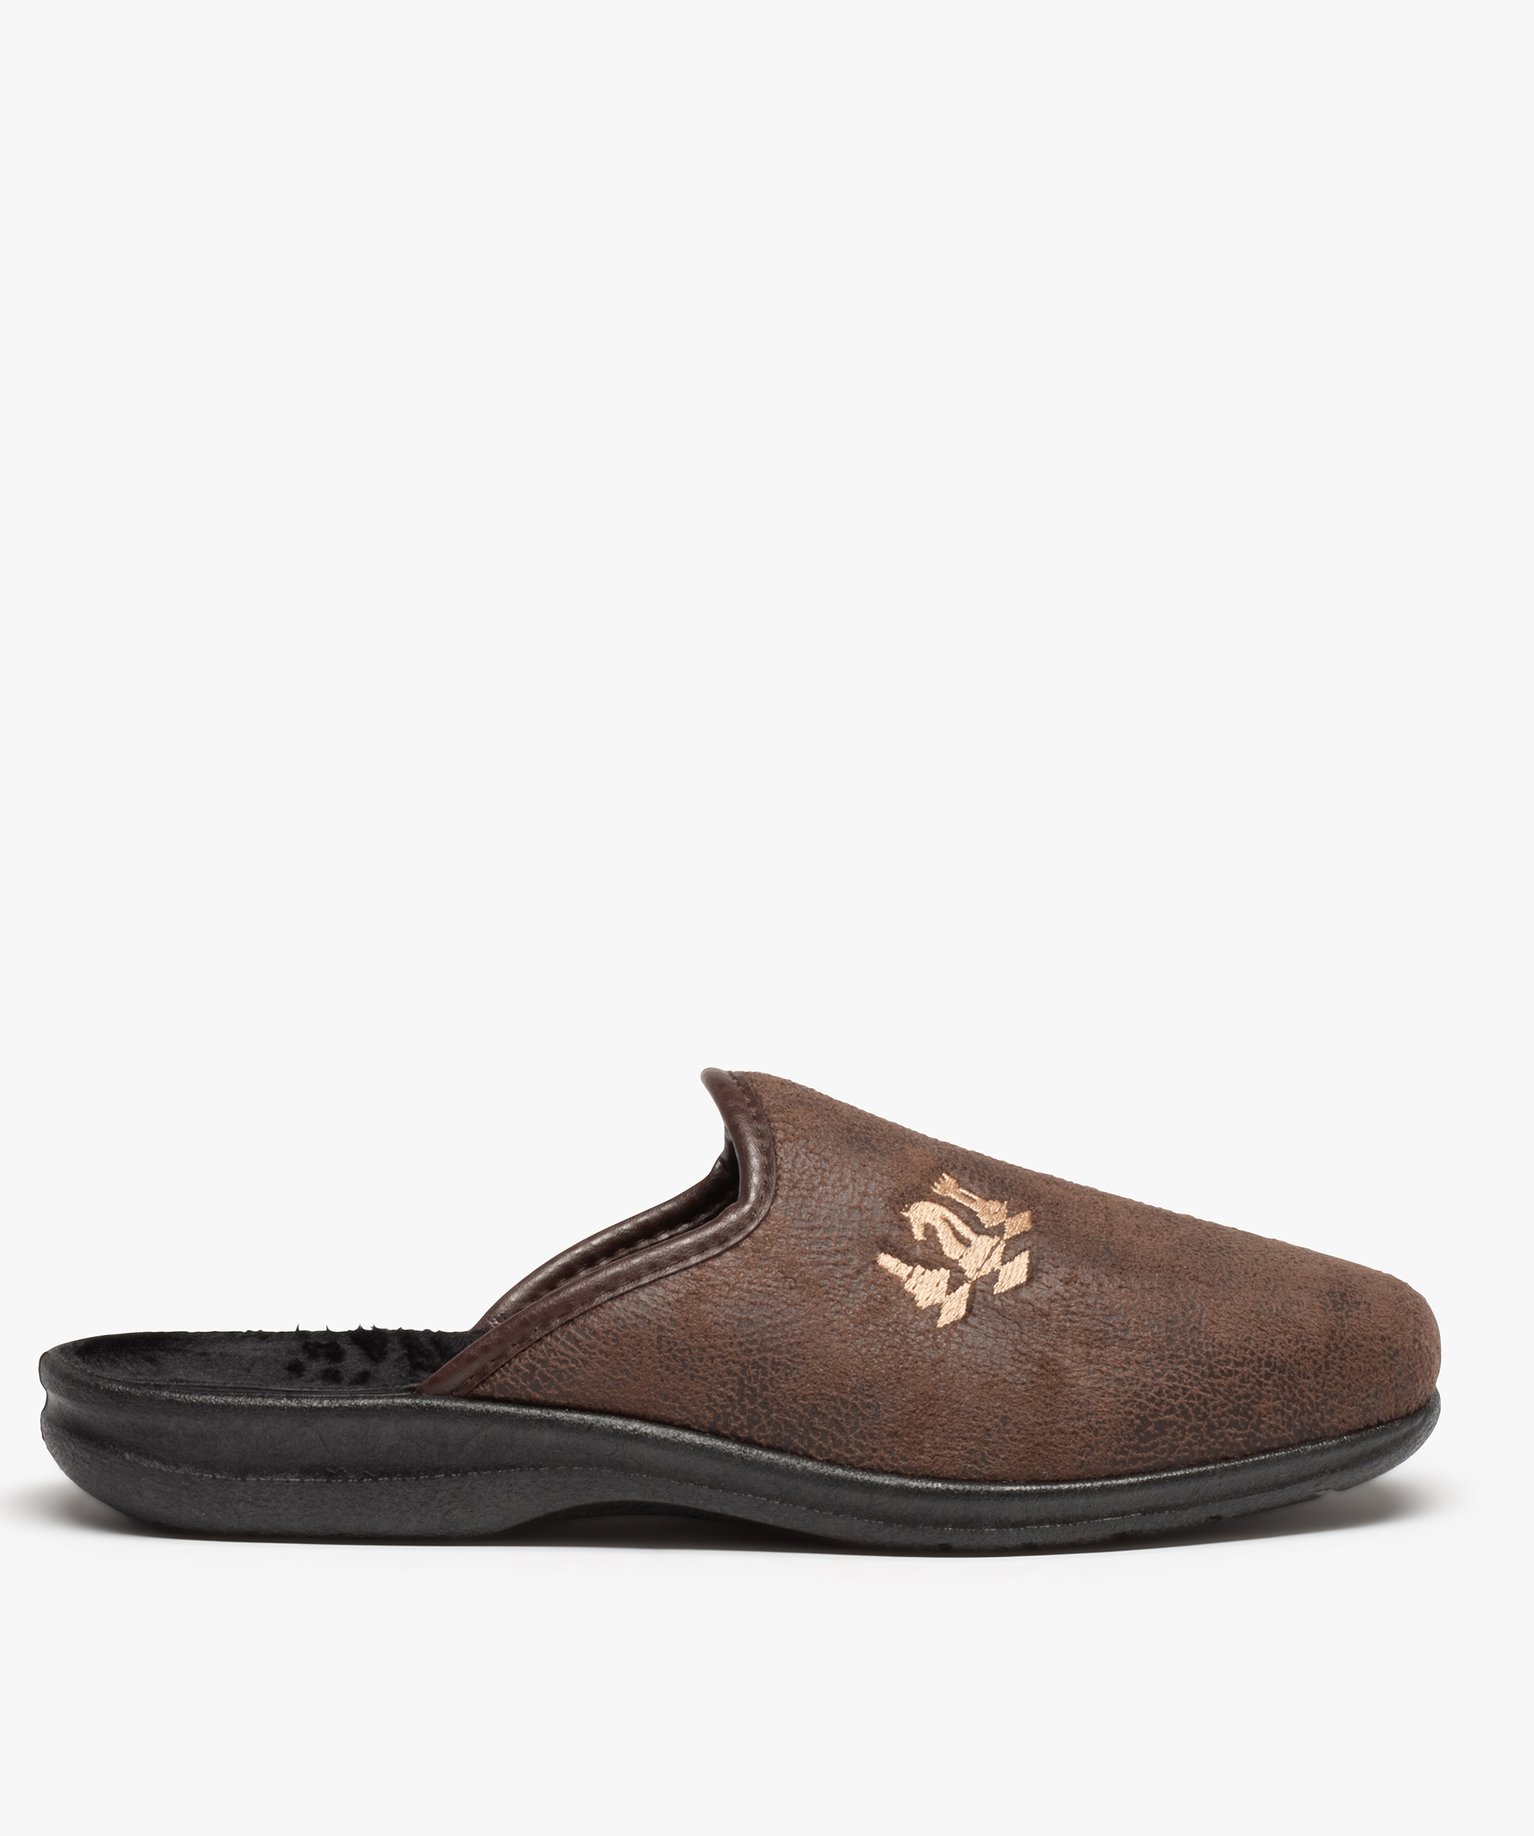 chaussons homme mules brodees dessus cuir imitation brun